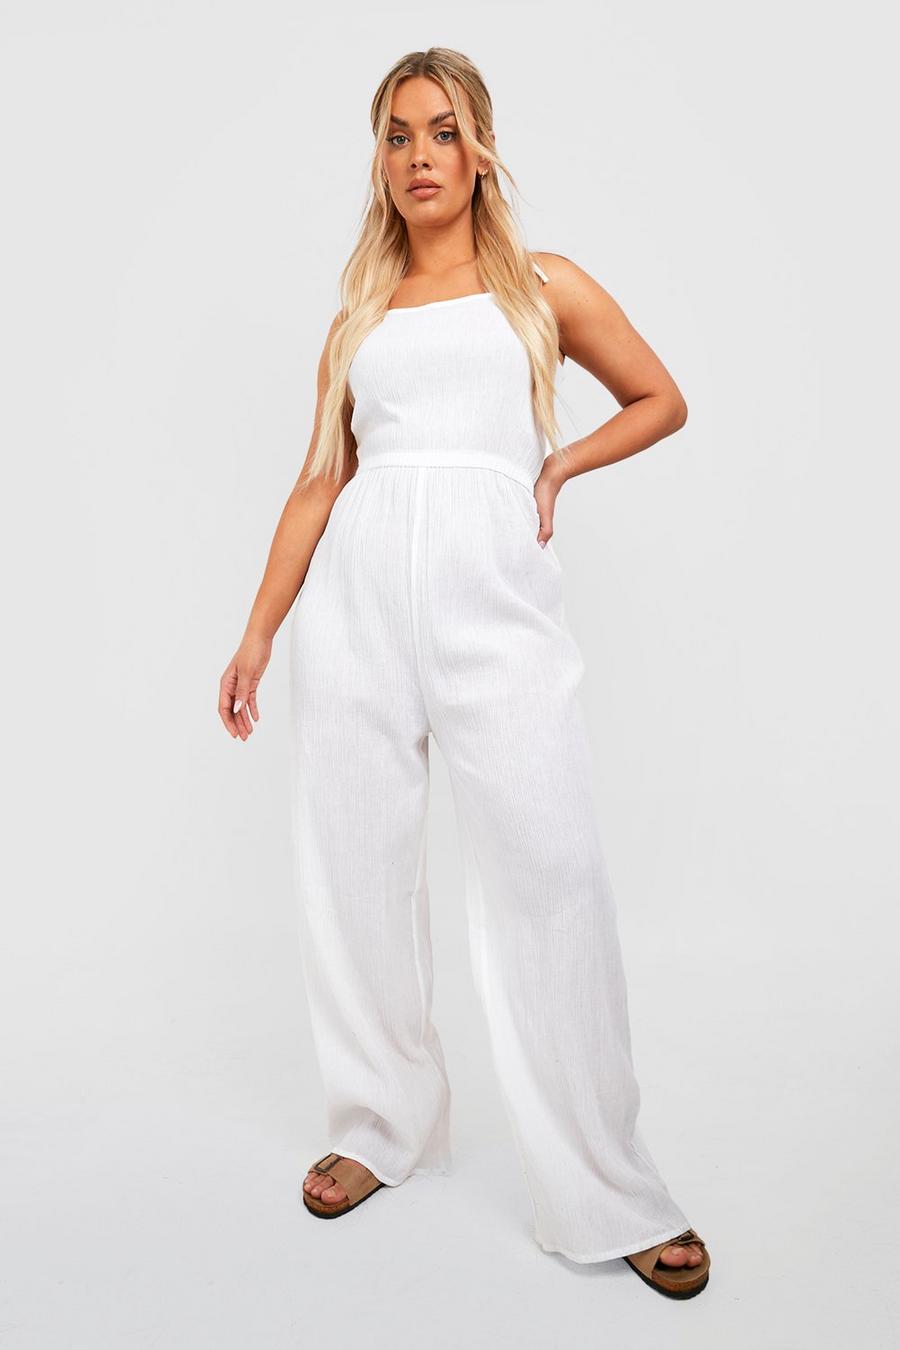 White Plus Cheesecloth Beach Jumpsuit